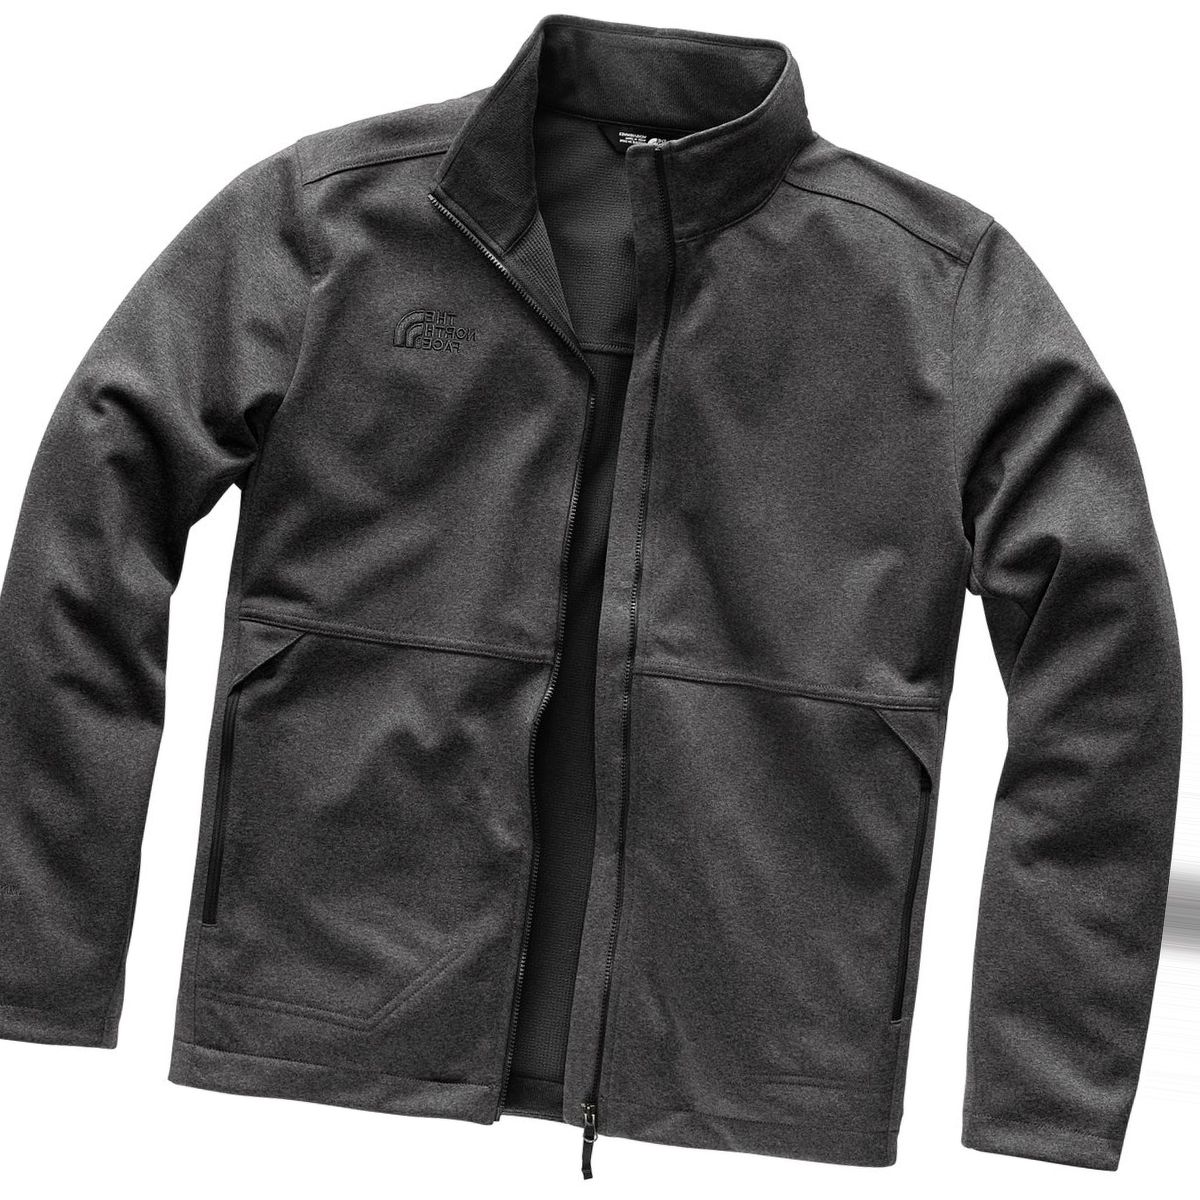 The North Face Apex Canyonwall Jacket - Men's